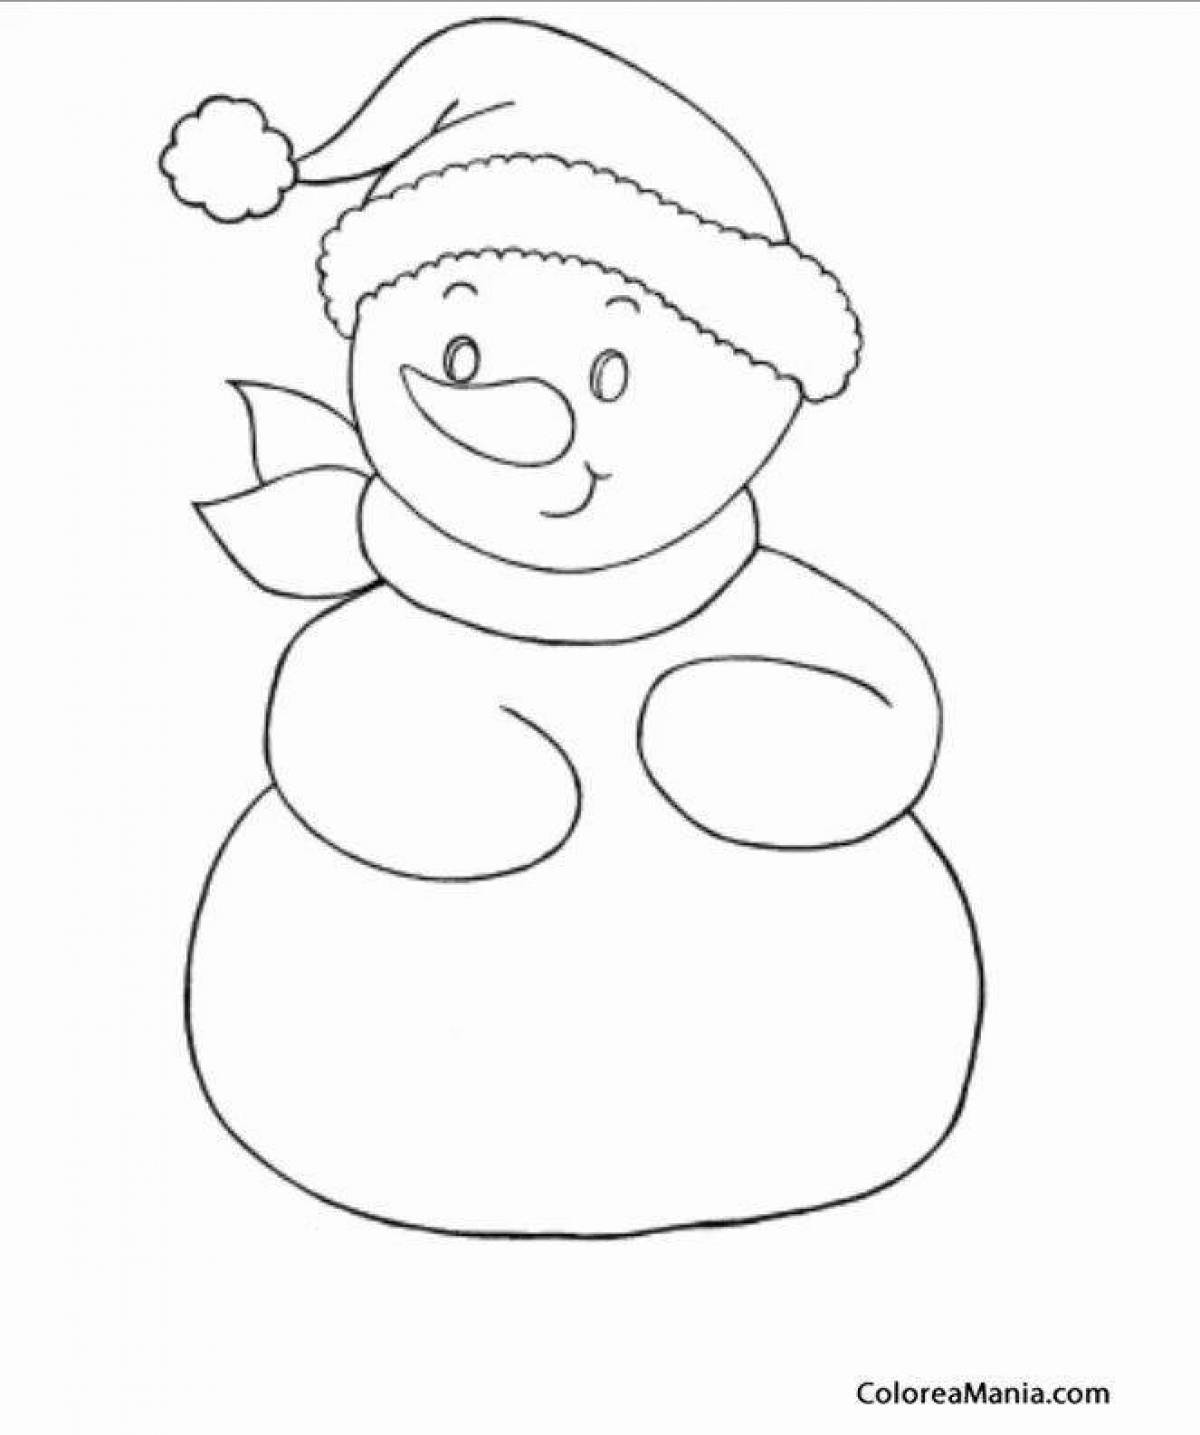 Charming snowman coloring book for kids 2-3 years old